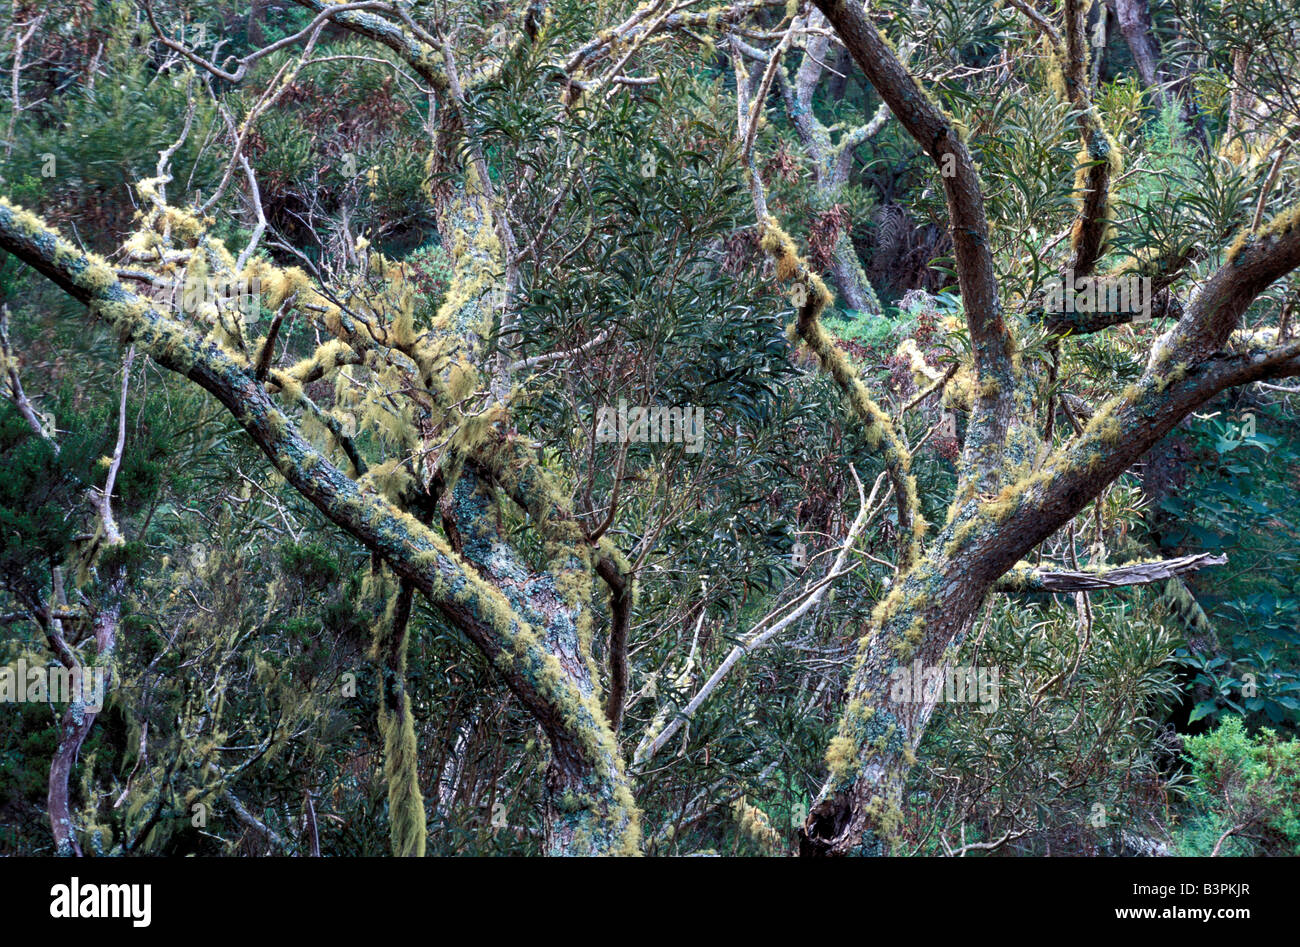 Lichens on trees, Rain forest, Reunion island, Indian Ocean, Africa Stock Photo